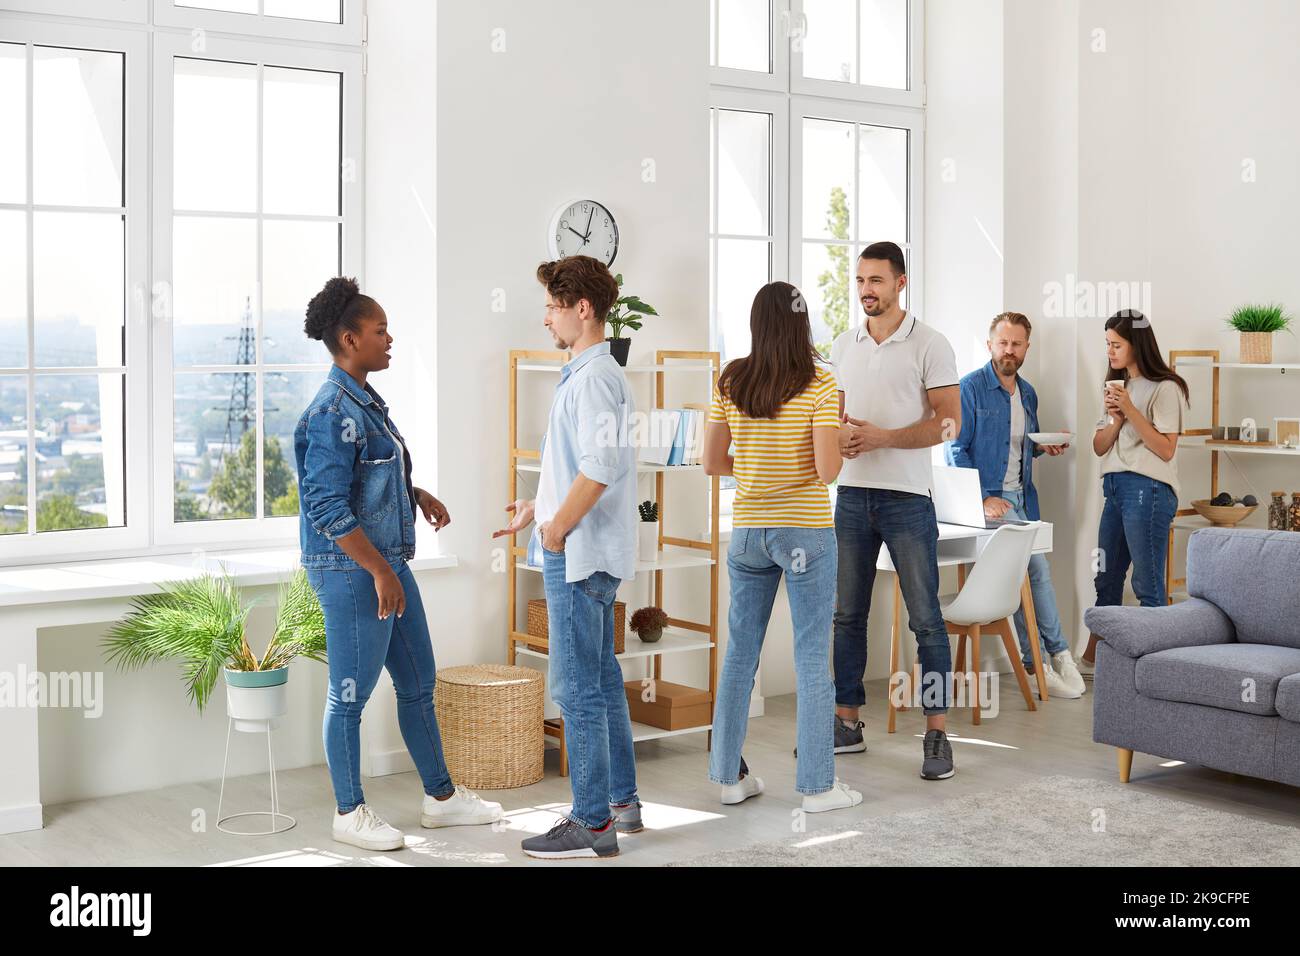 Group of multiracial friends meeting, hanging out and discussing something together Stock Photo